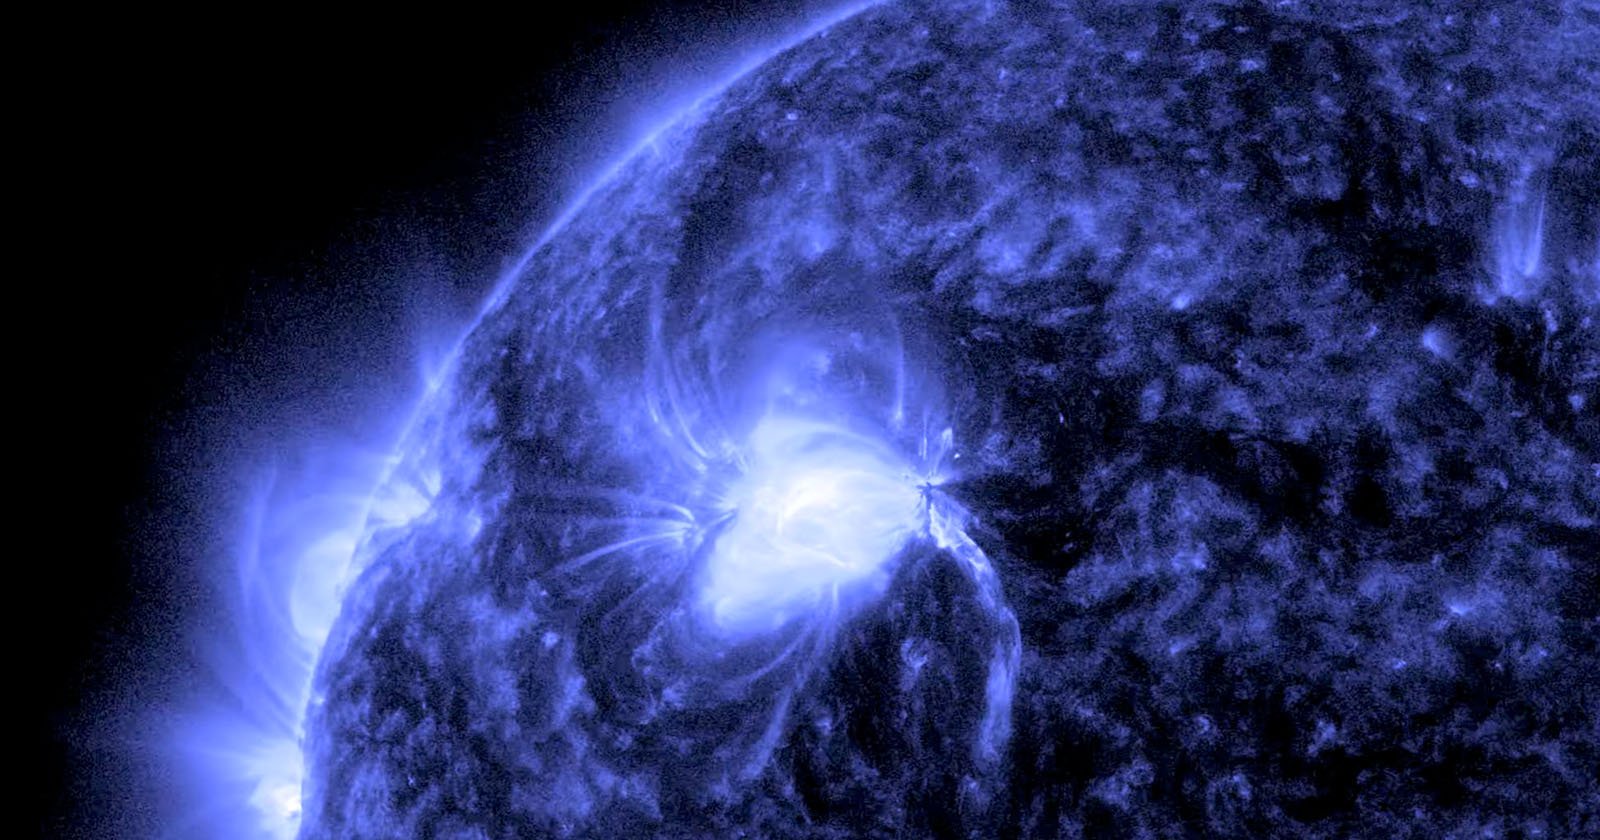 See the Suns Explosive Energy Captured Across Extreme Wavelengths